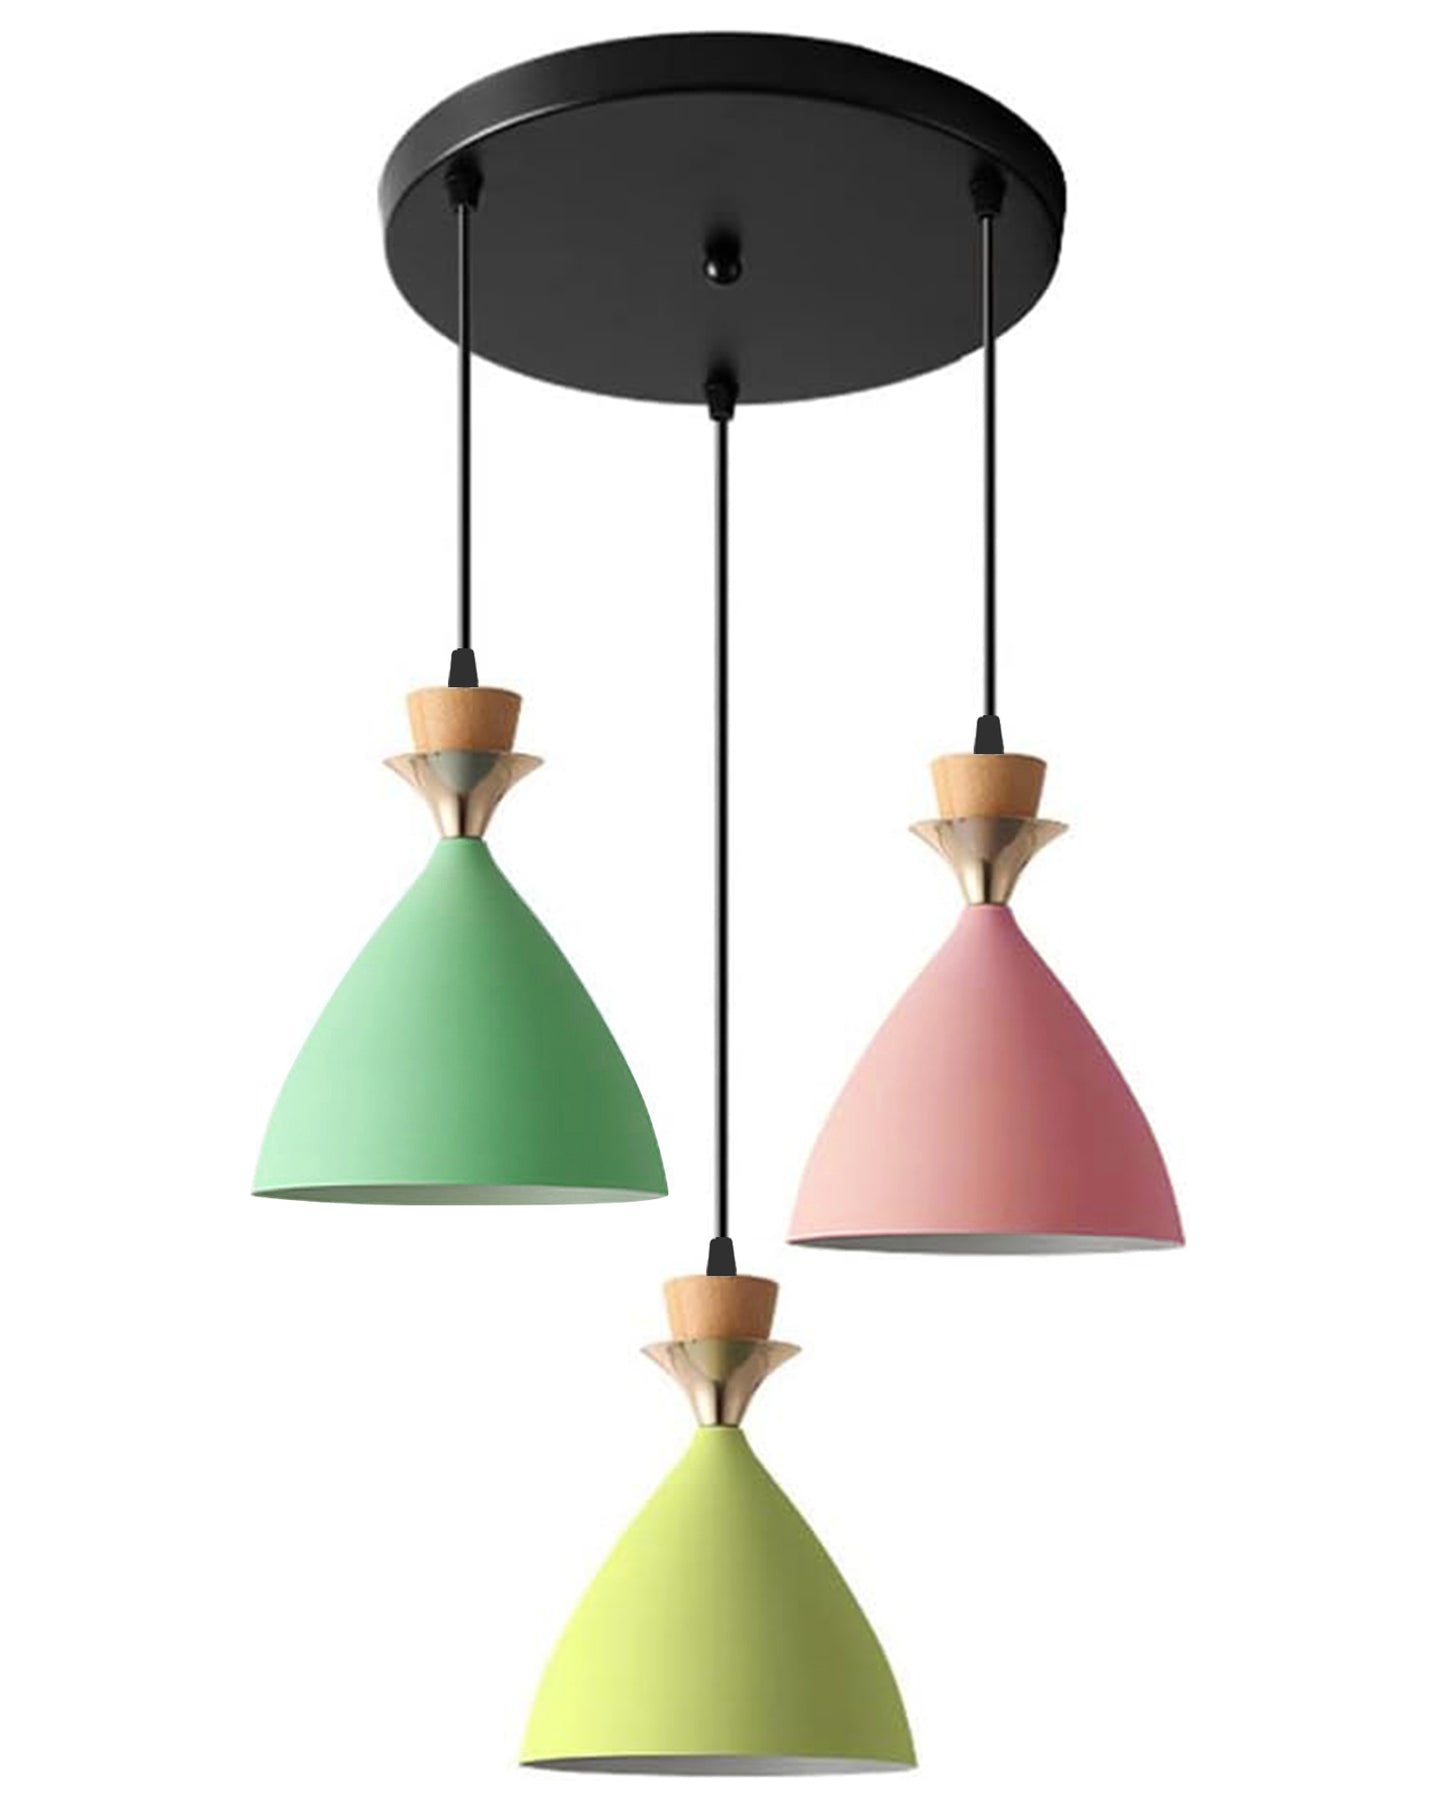 Pendant Lamp Shade for Kitchen Island, Color Metal Minimal Pot Pendant Light Shades, Nordic Style for Bedroom, Living Room, Macaron